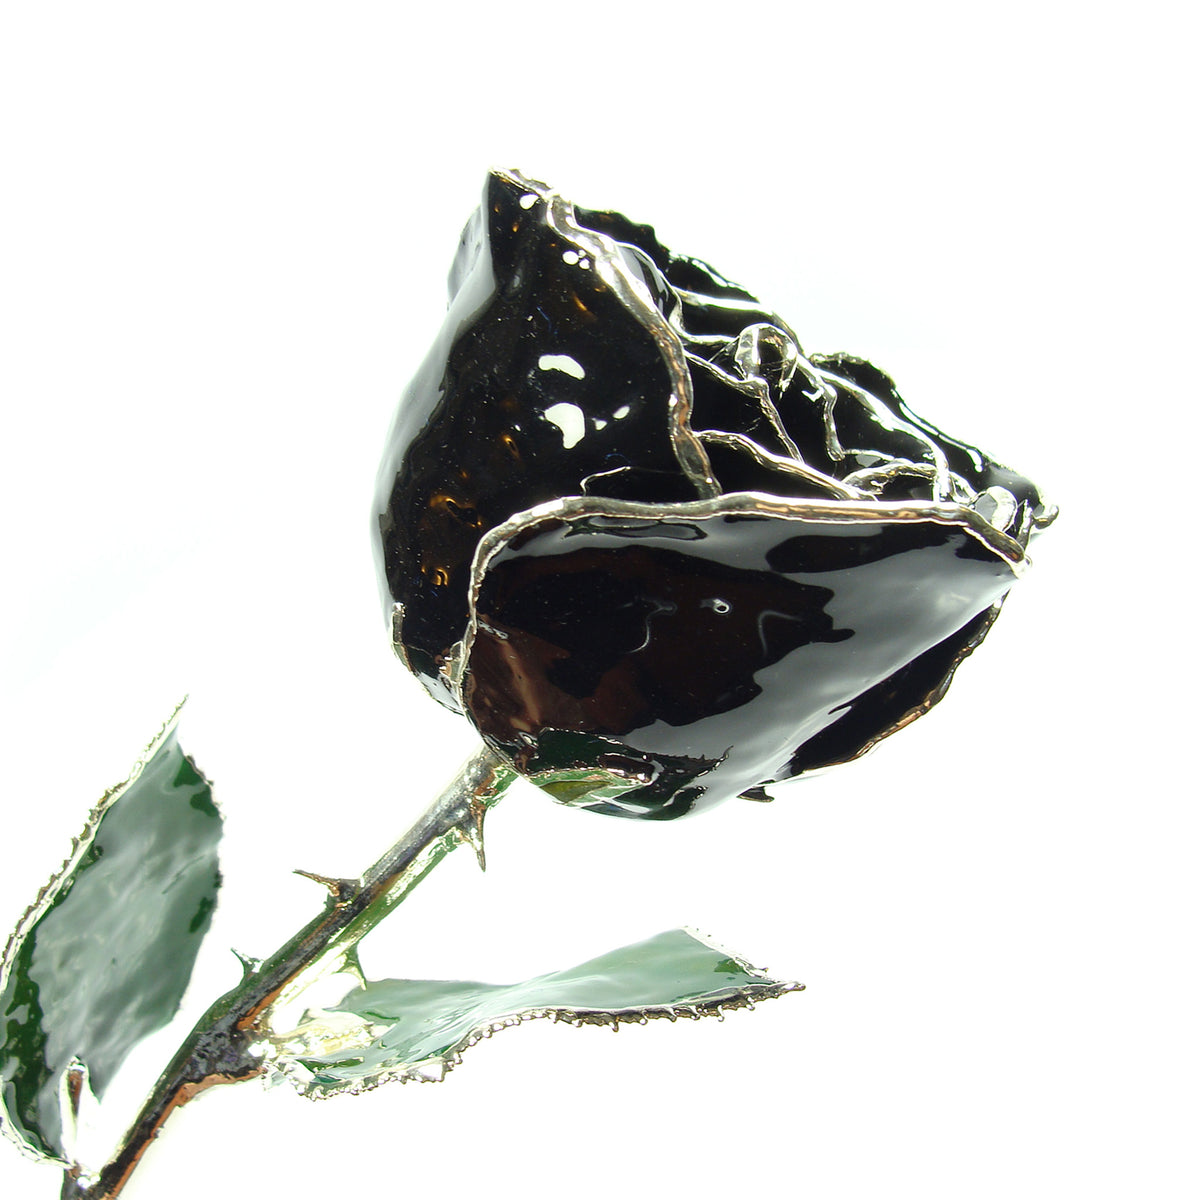 Silver Trimmed Forever Rose with Black Petals. View of Stem, Leaves, and Rose Petals and Showing Detail of Silver Trim